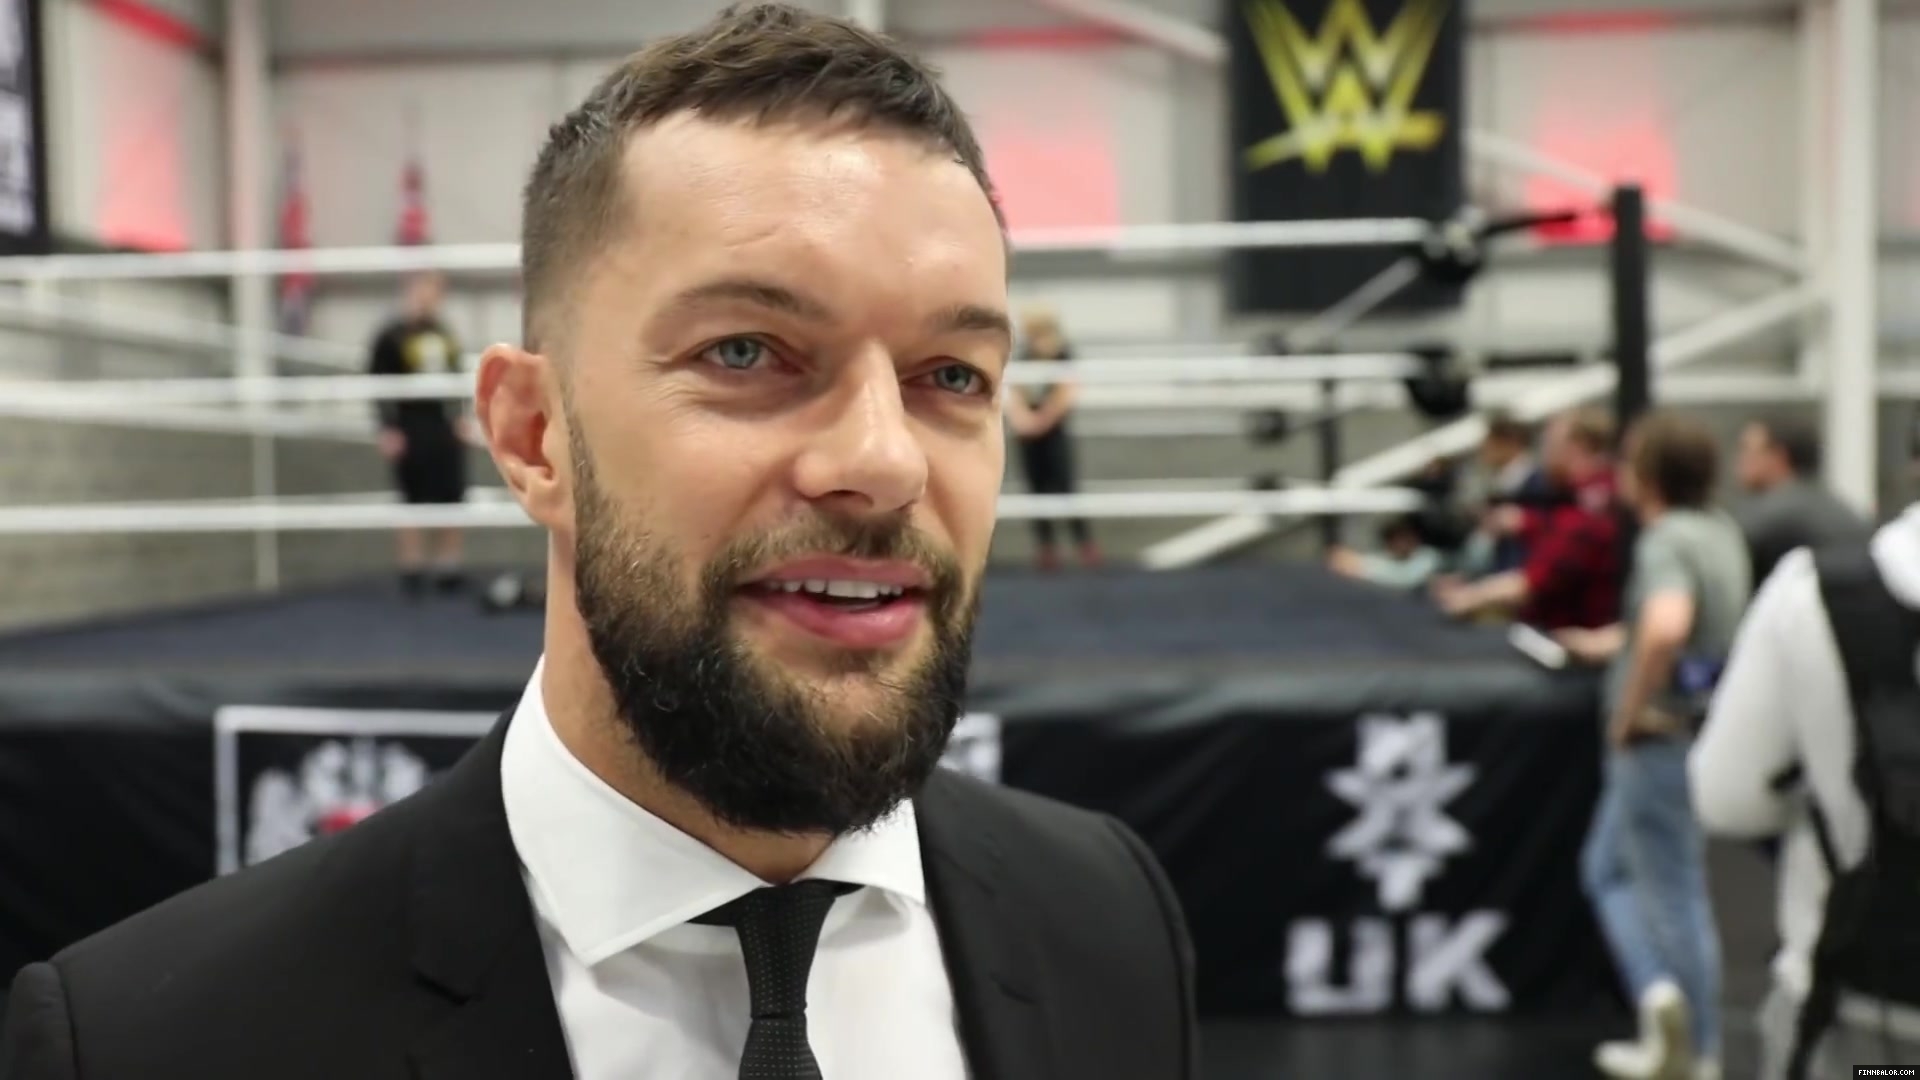 WWE_Superstar_FINN_BALOR_joins_MOUSTACHE_MOUNTAIN_at_the_opening_of_the_NXT_UK_PC_105.jpg